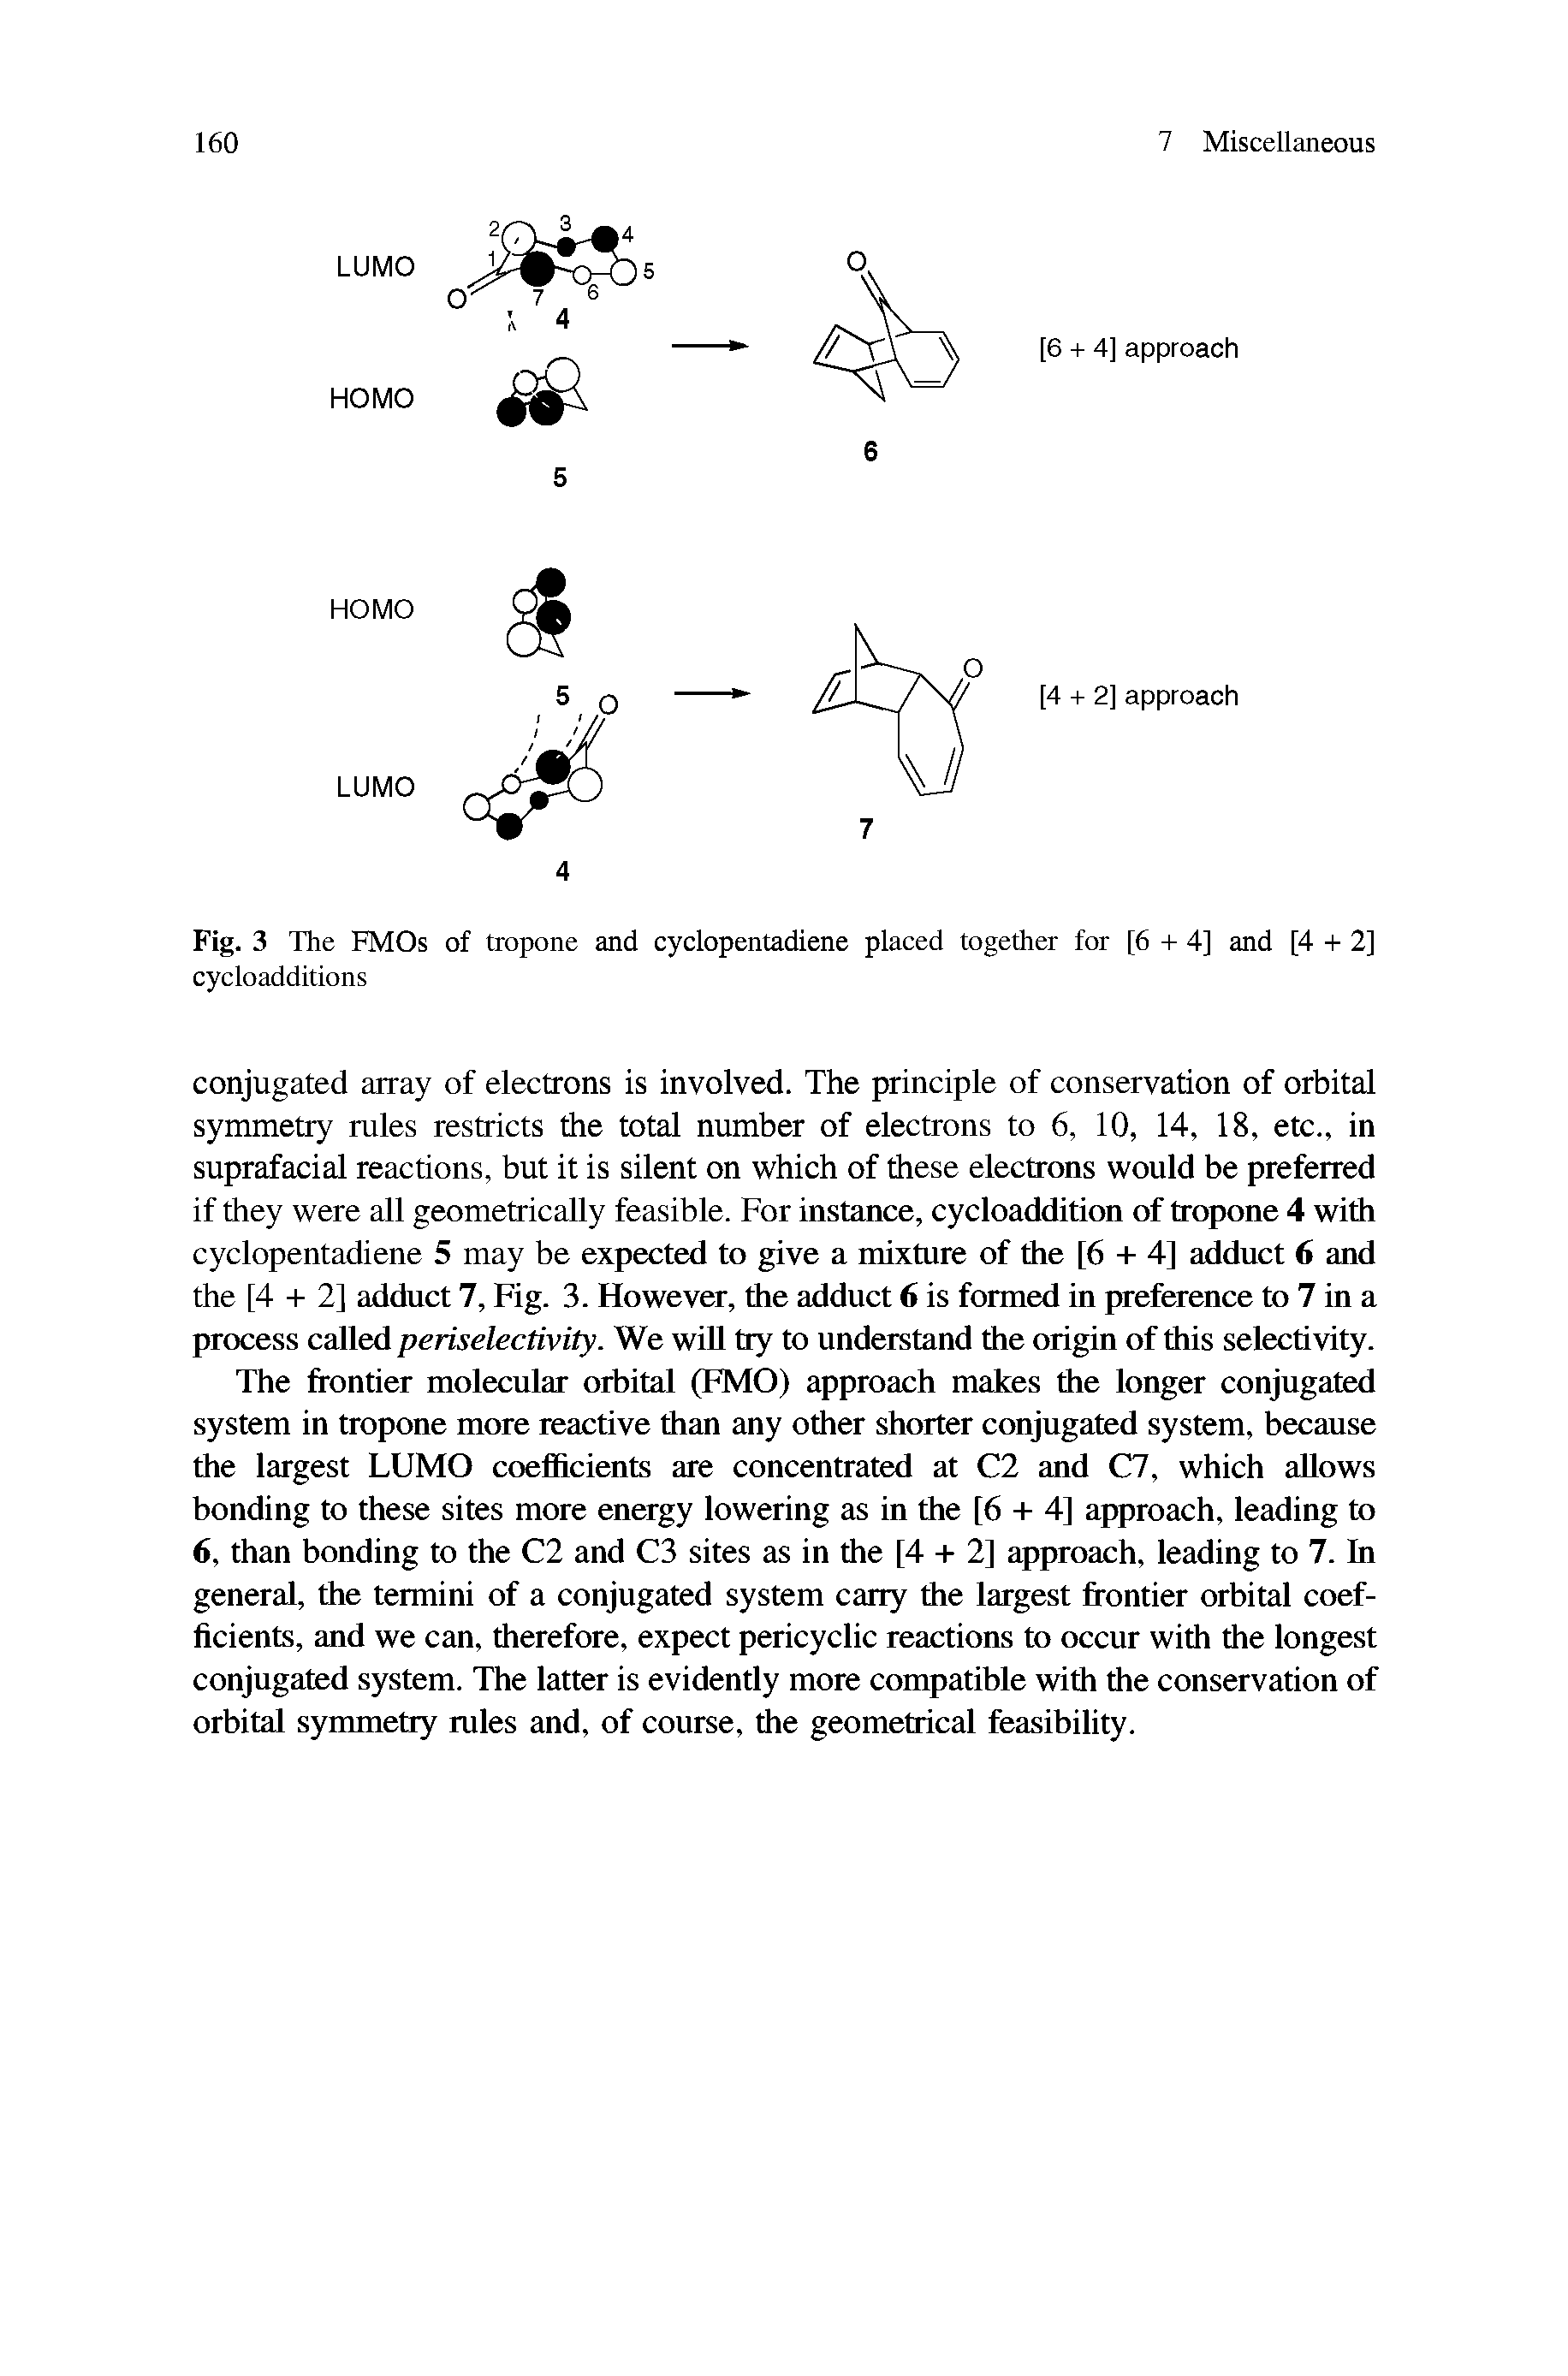 Fig. 3 The EMOs of tropone and cyclopentadiene placed together for [6 + 4] and [4 + 2] cycloadditions...